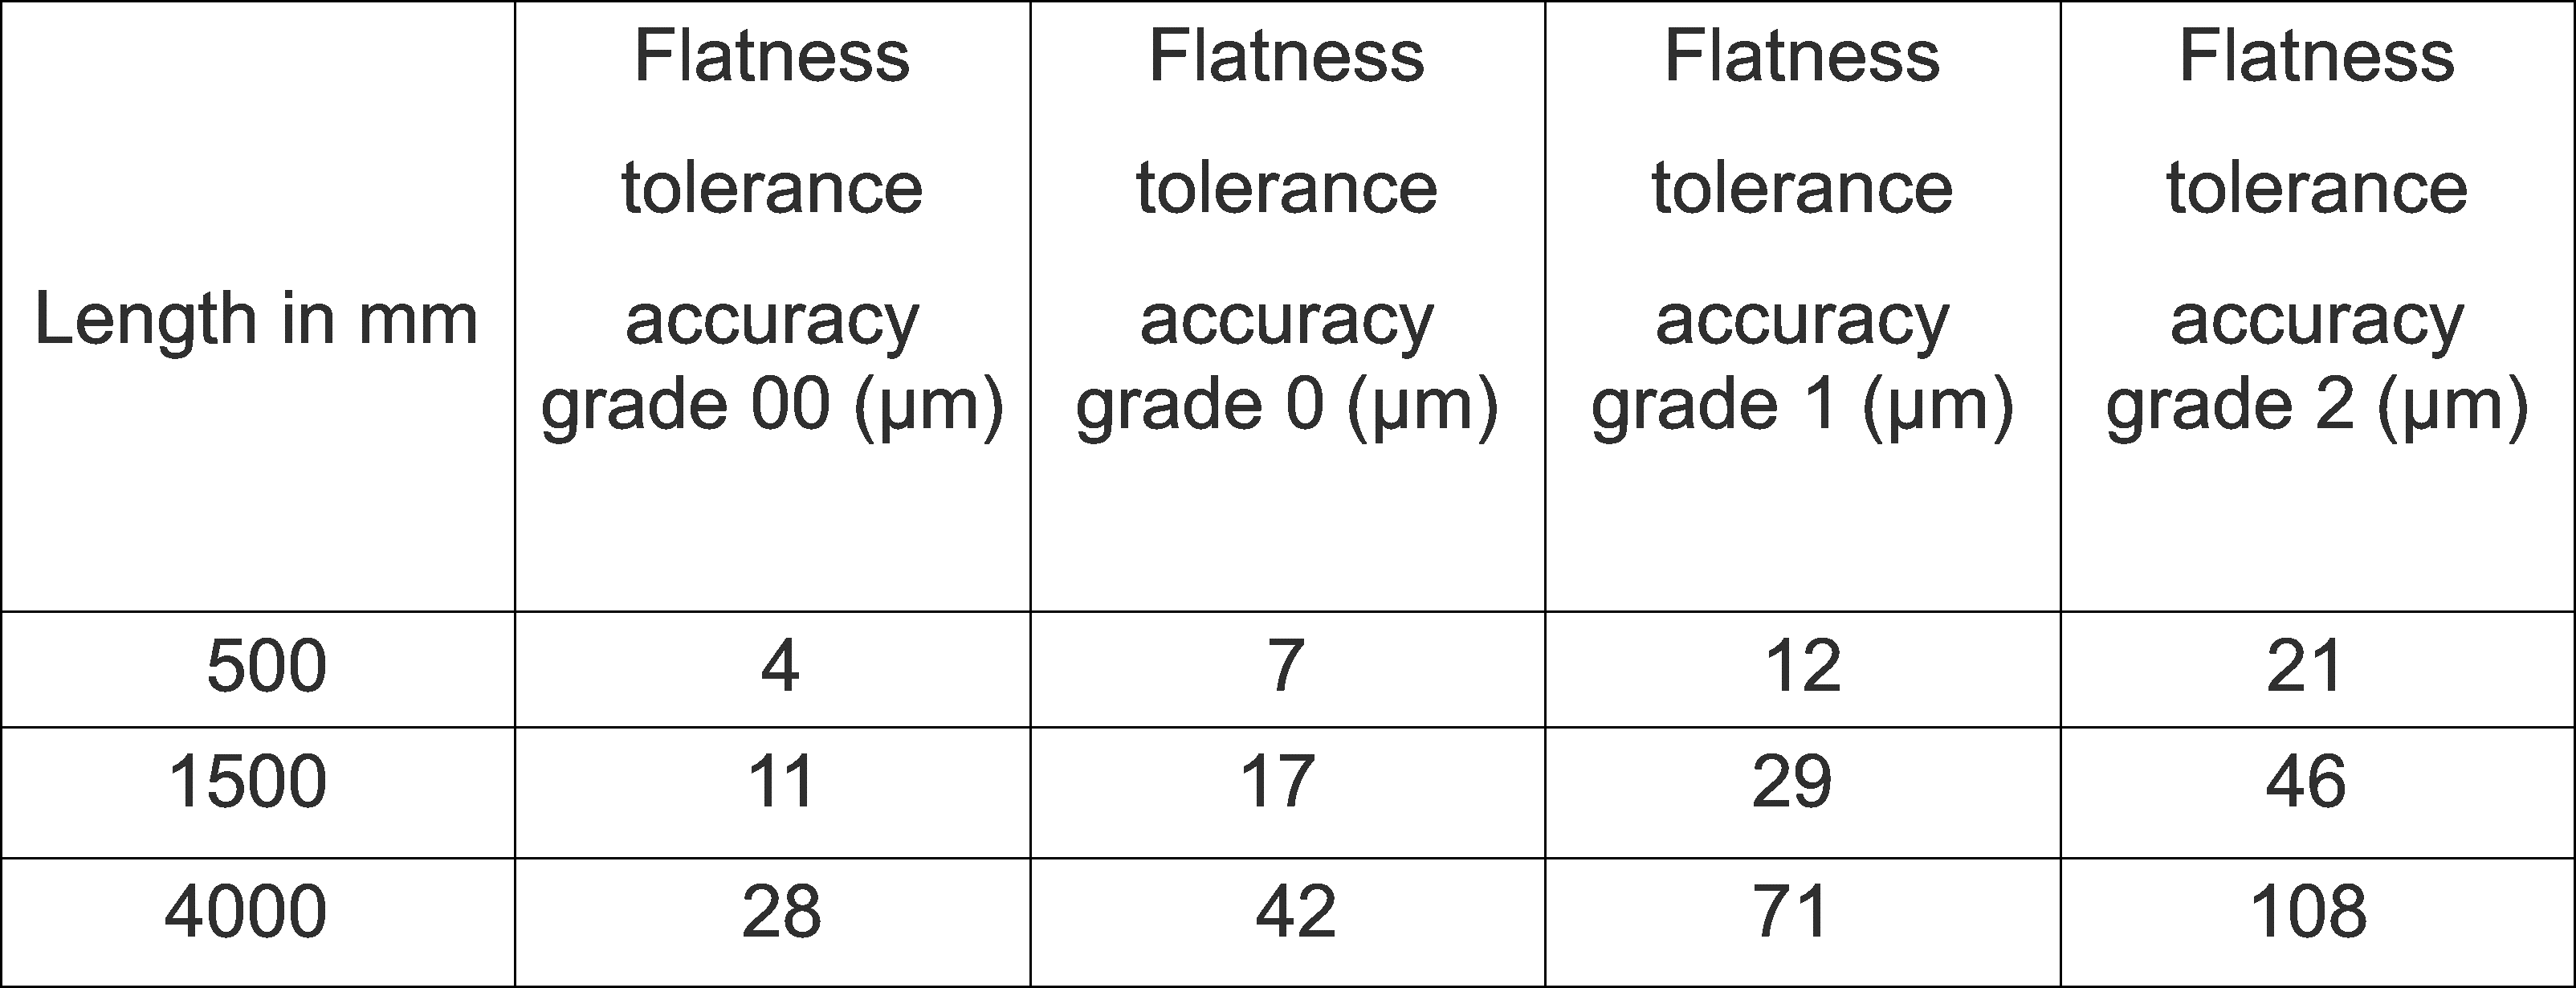 Flatness tolerance for various lengths and grades of engineer's straight edges